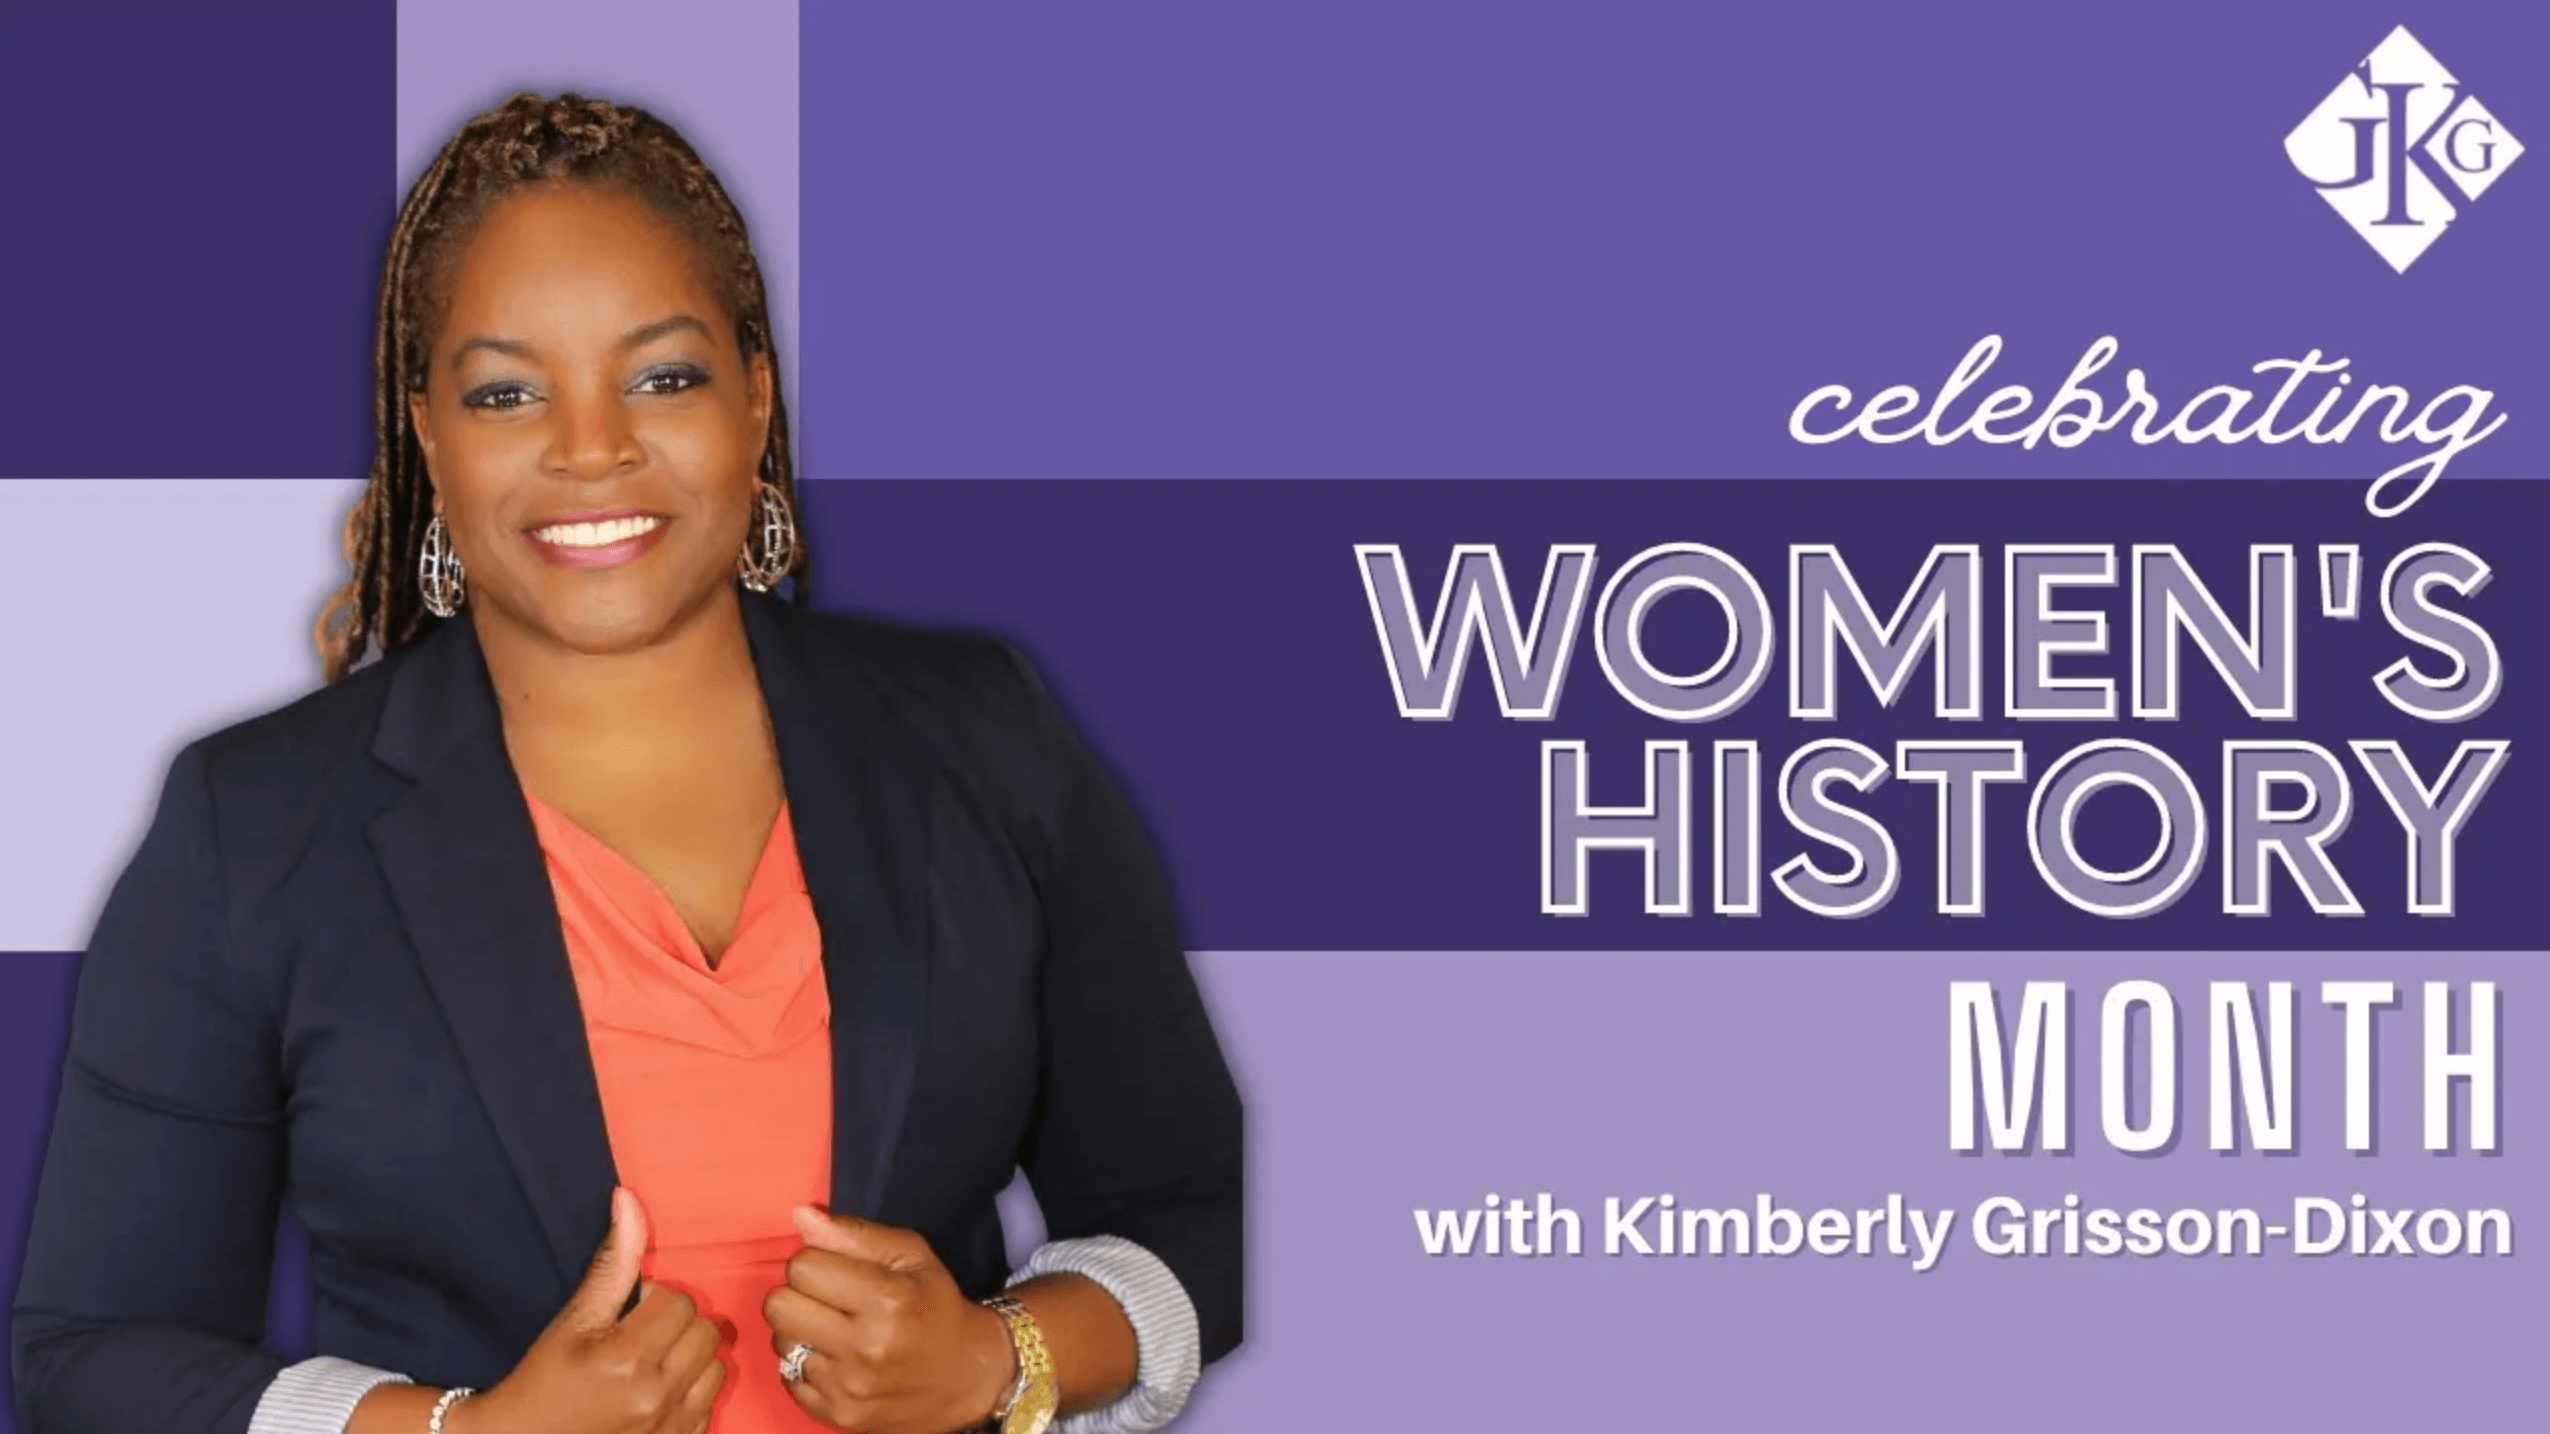 Woman in a business suit smiling, with the text "celebrating women's history month with Kimberly Grisson-Dixon" on a purple background, emphasizing Human Capital Management.